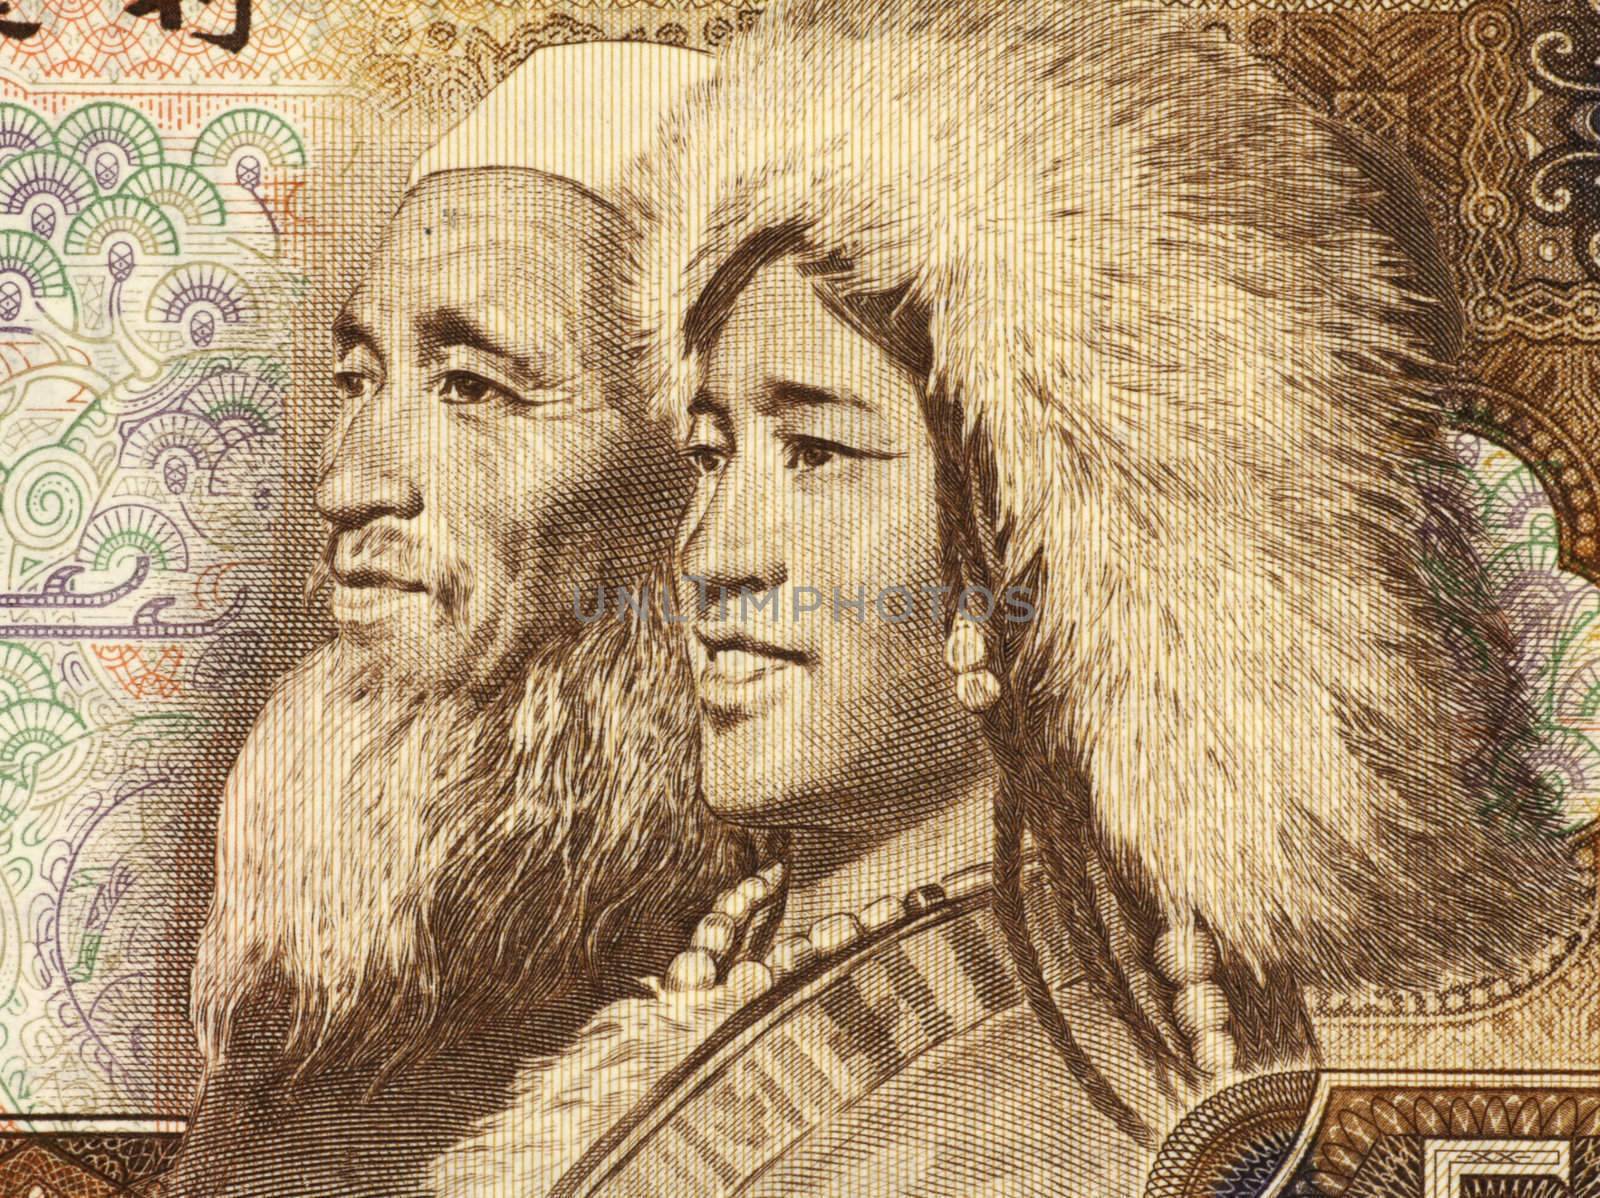 Old Tibetan Man and Young Islamic Woman on 5 Yuan 1980 Banknote from China.